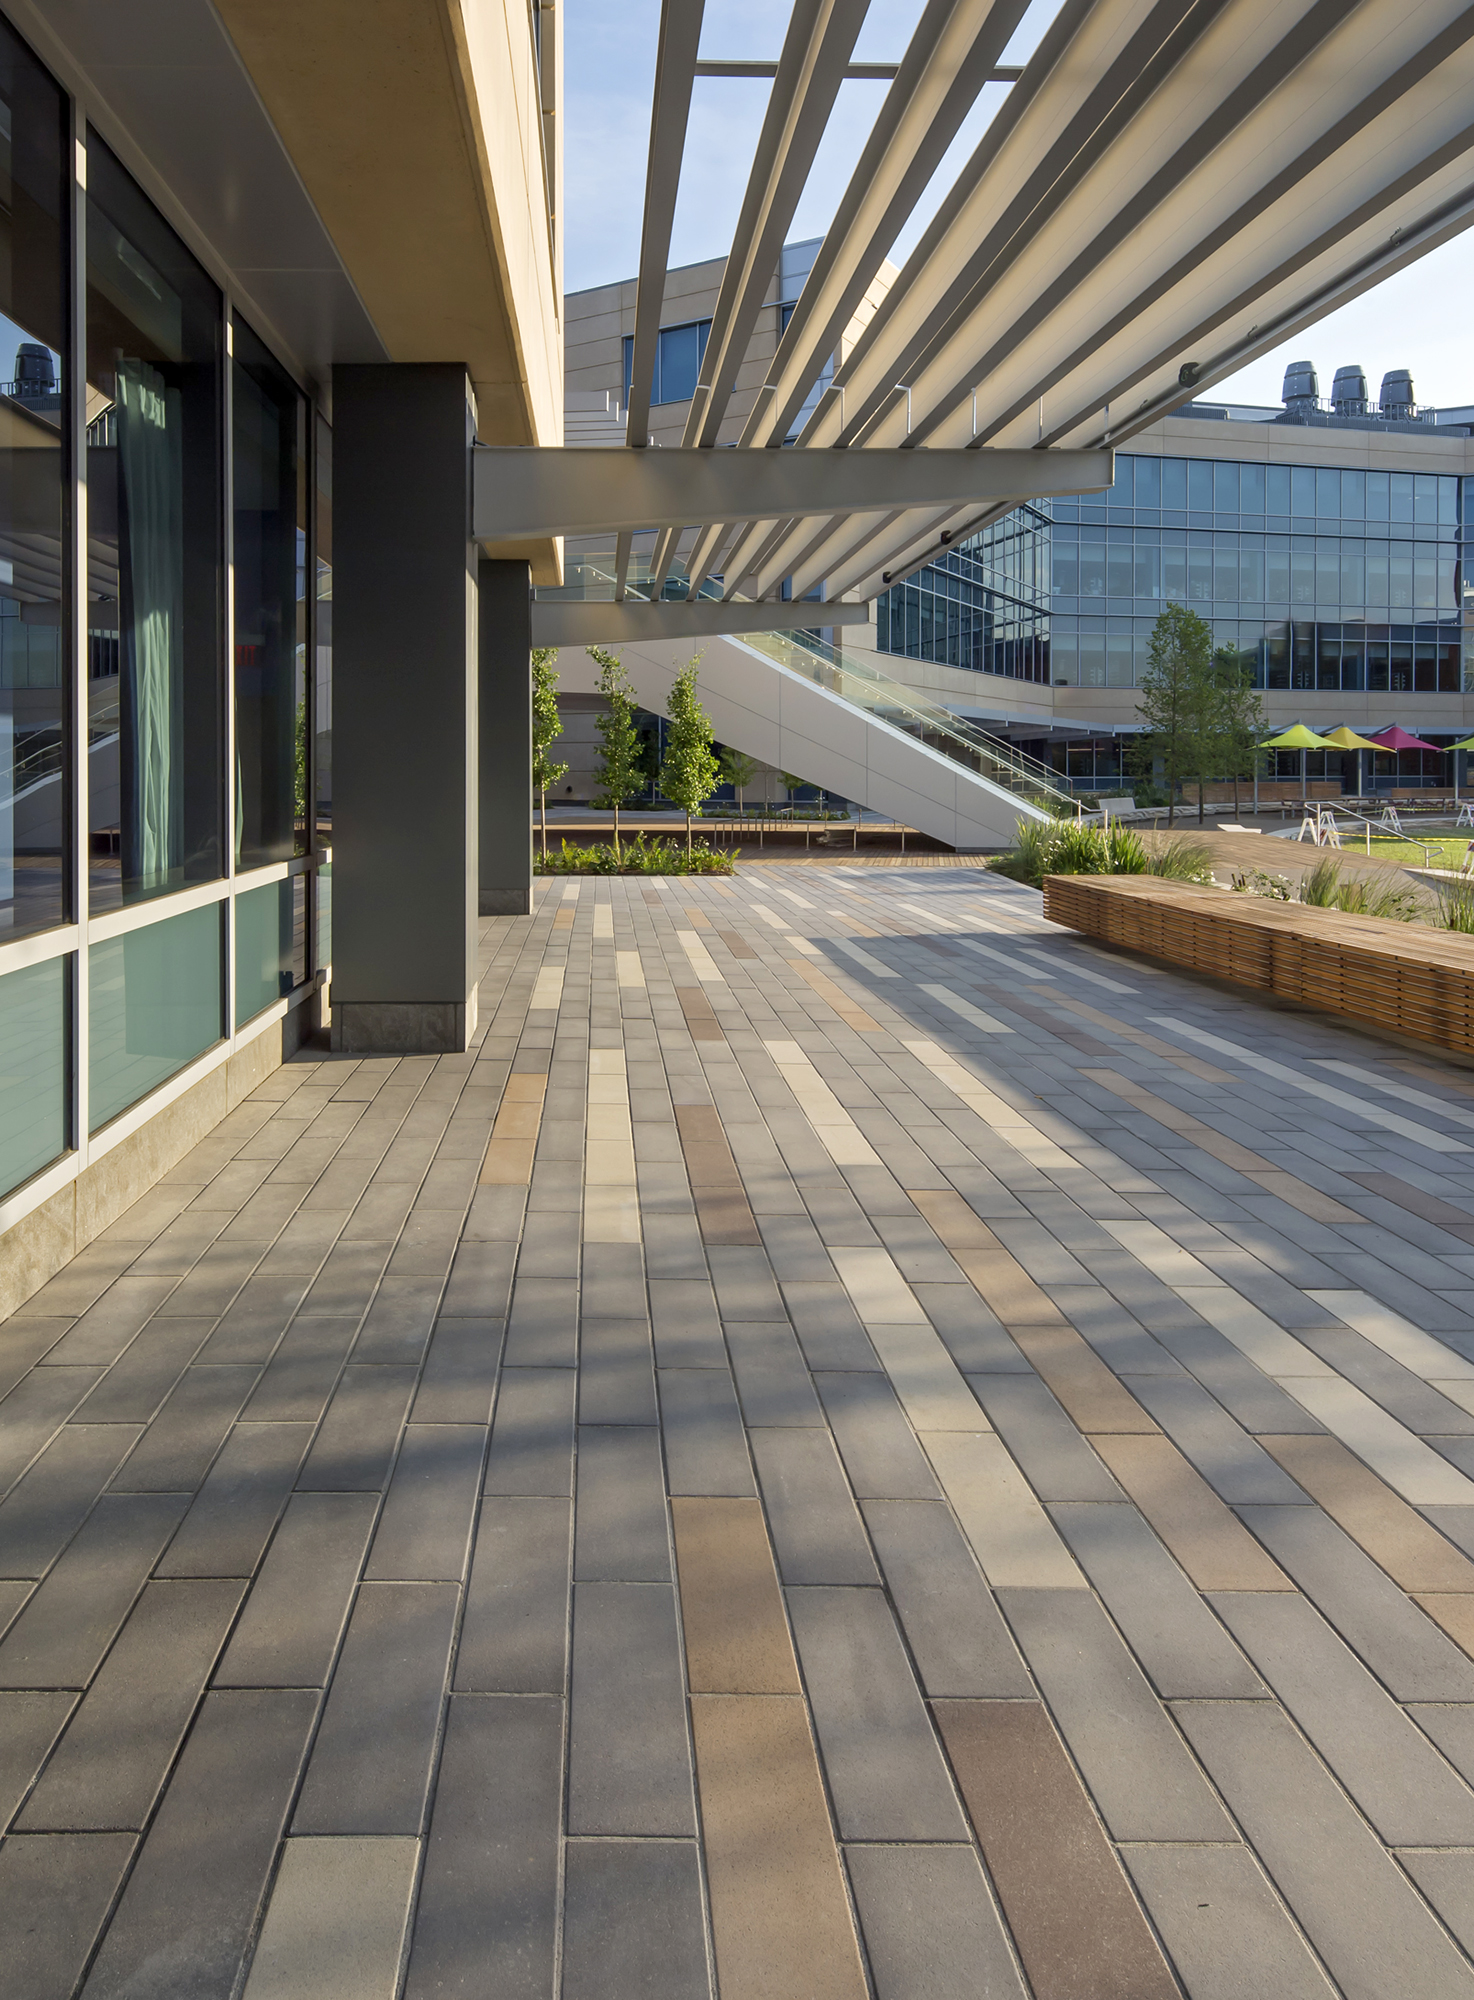 Promenade Planks in four unique colors  make a walking area under a pagoda beside the Hudson Valley Office Complex.